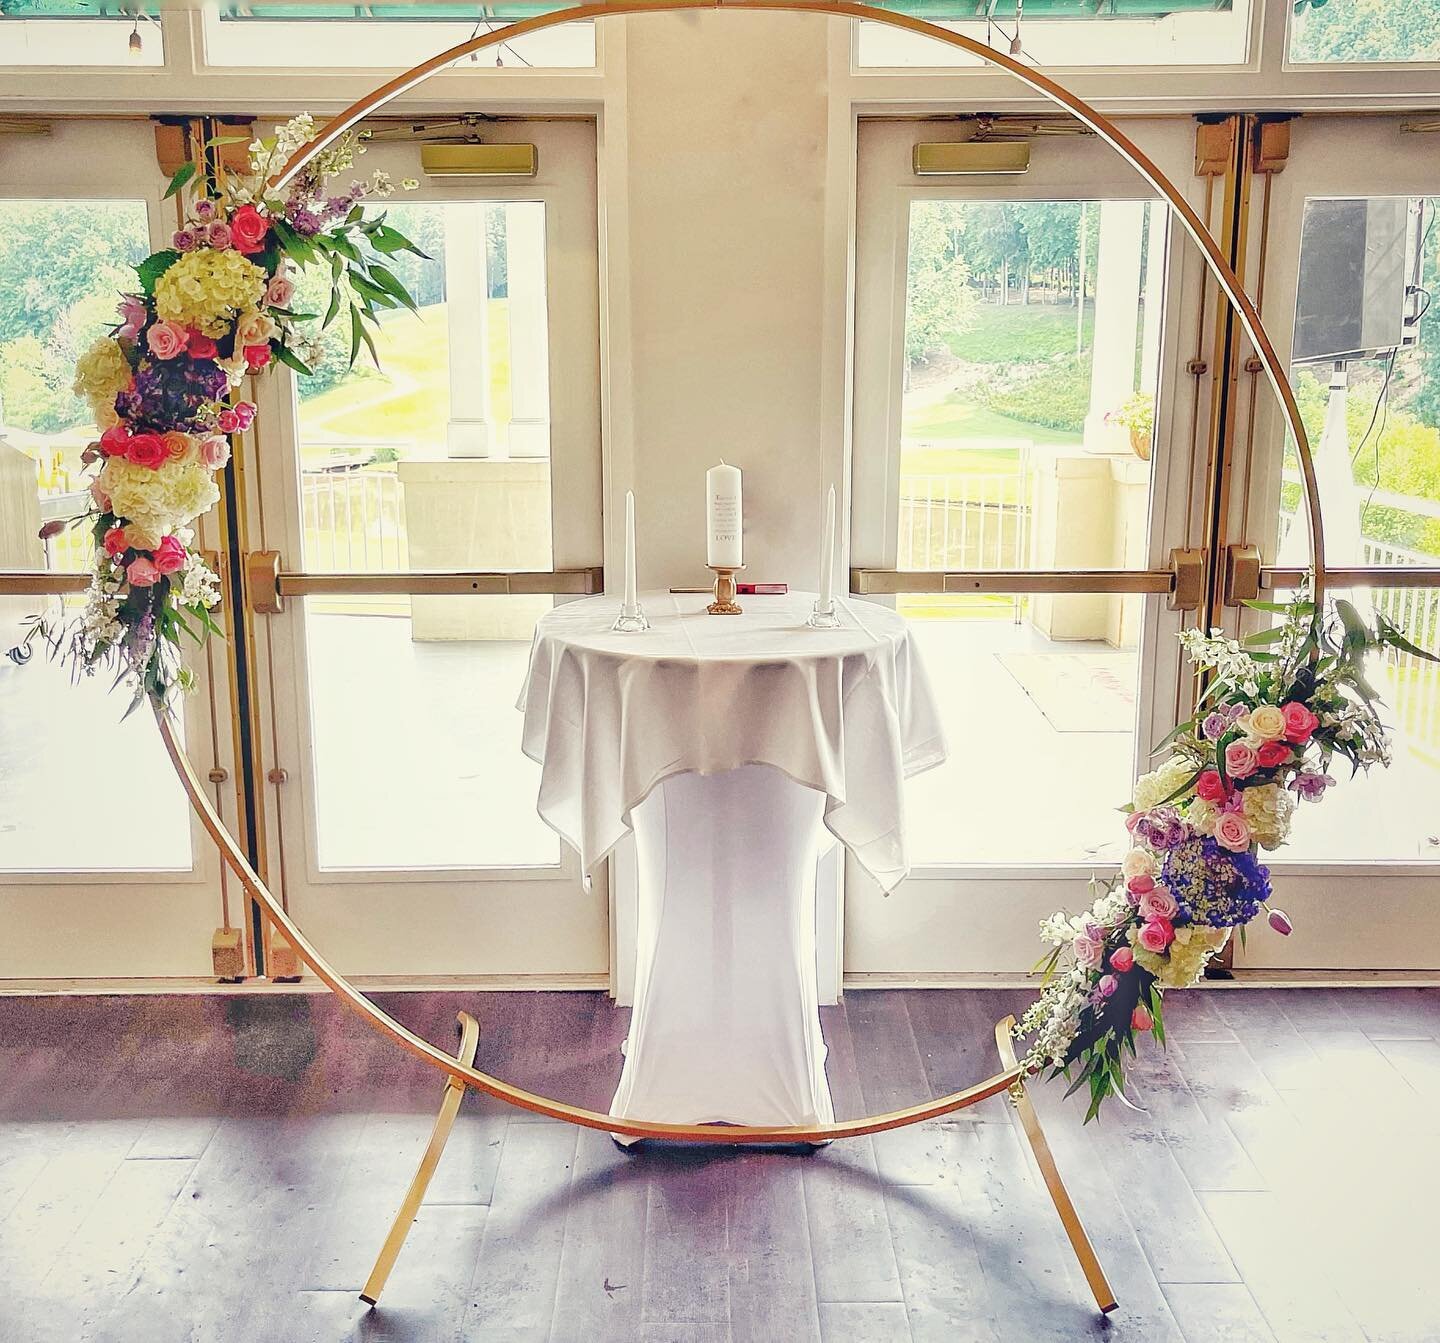 Yesterday was HOT so the ceremony moved indoors - fortunately our moon gate transitions perfectly. Congrats to D&amp;Q 🥂💕